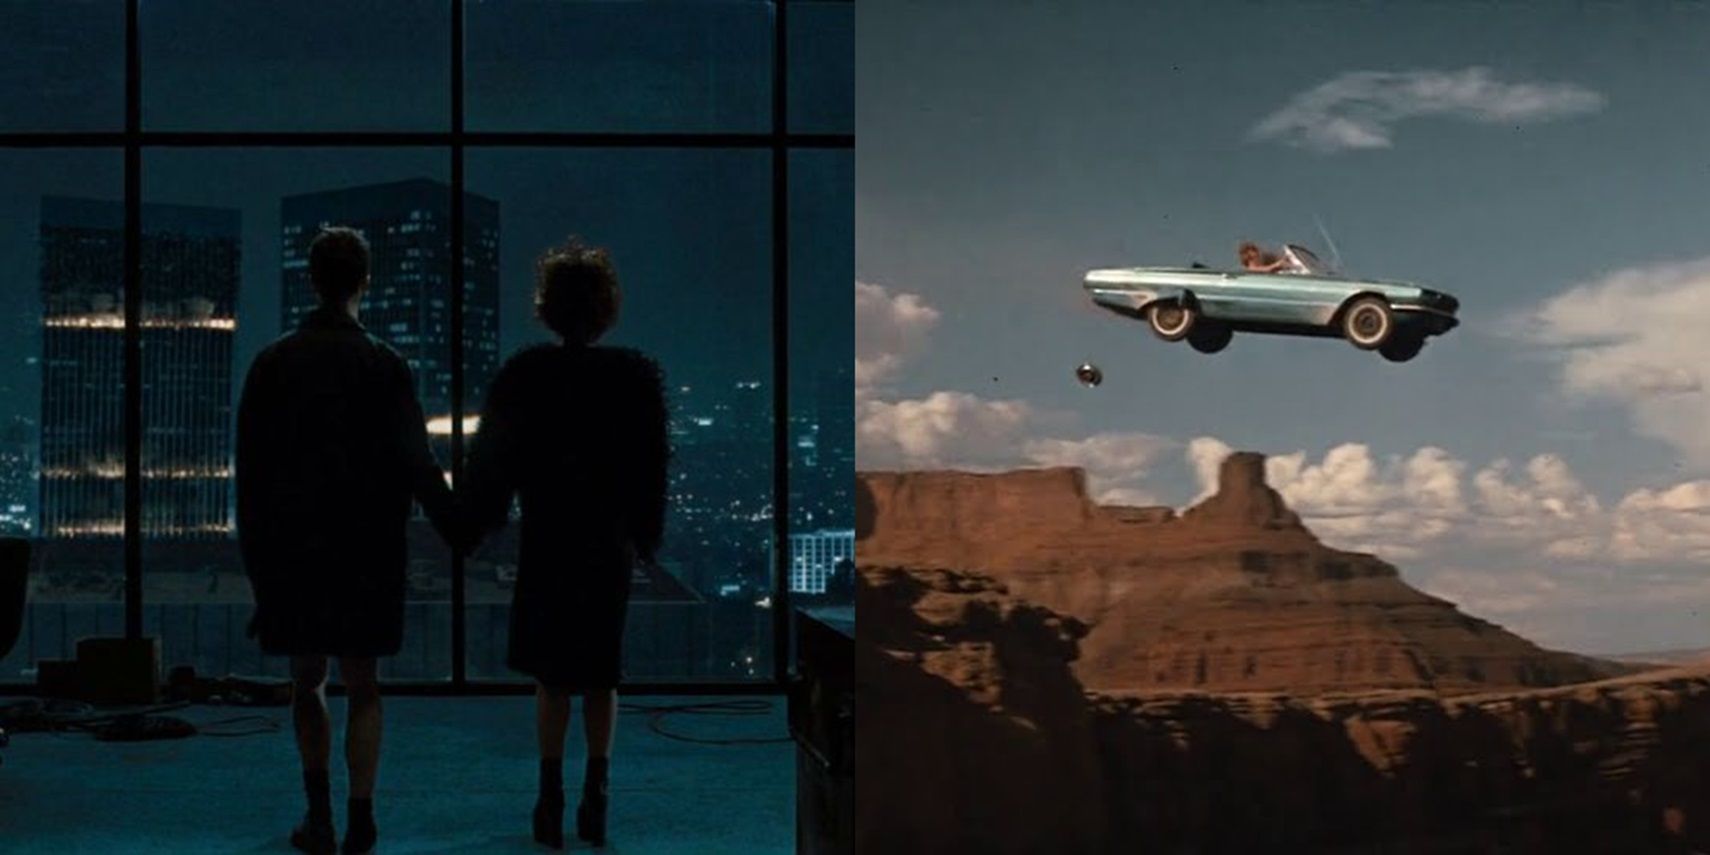 The final shots of Fight Club and Thelma and Louise